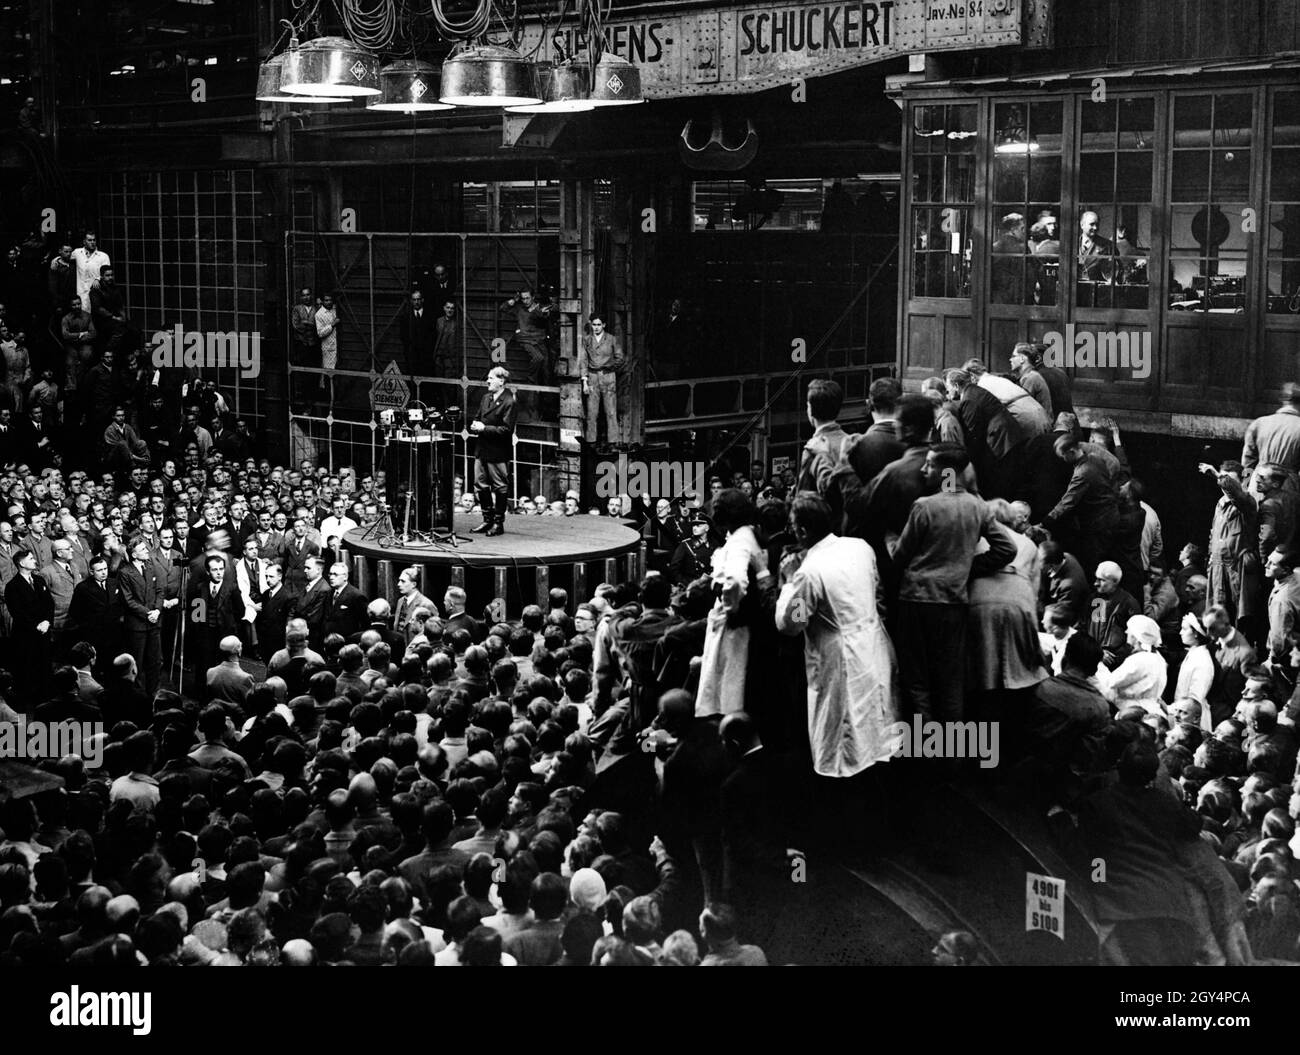 View into the assembly hall of the dynamo plant of the Siemens Works during Adolf Hitler's speech in jacket and leather stiffeners in the course of the election campaign for the Reichstag elections of 12.12.1933 and the vote to leave the League of Nations. Siemens dynamo plant in Nonnenallee. [automated translation] Stock Photo